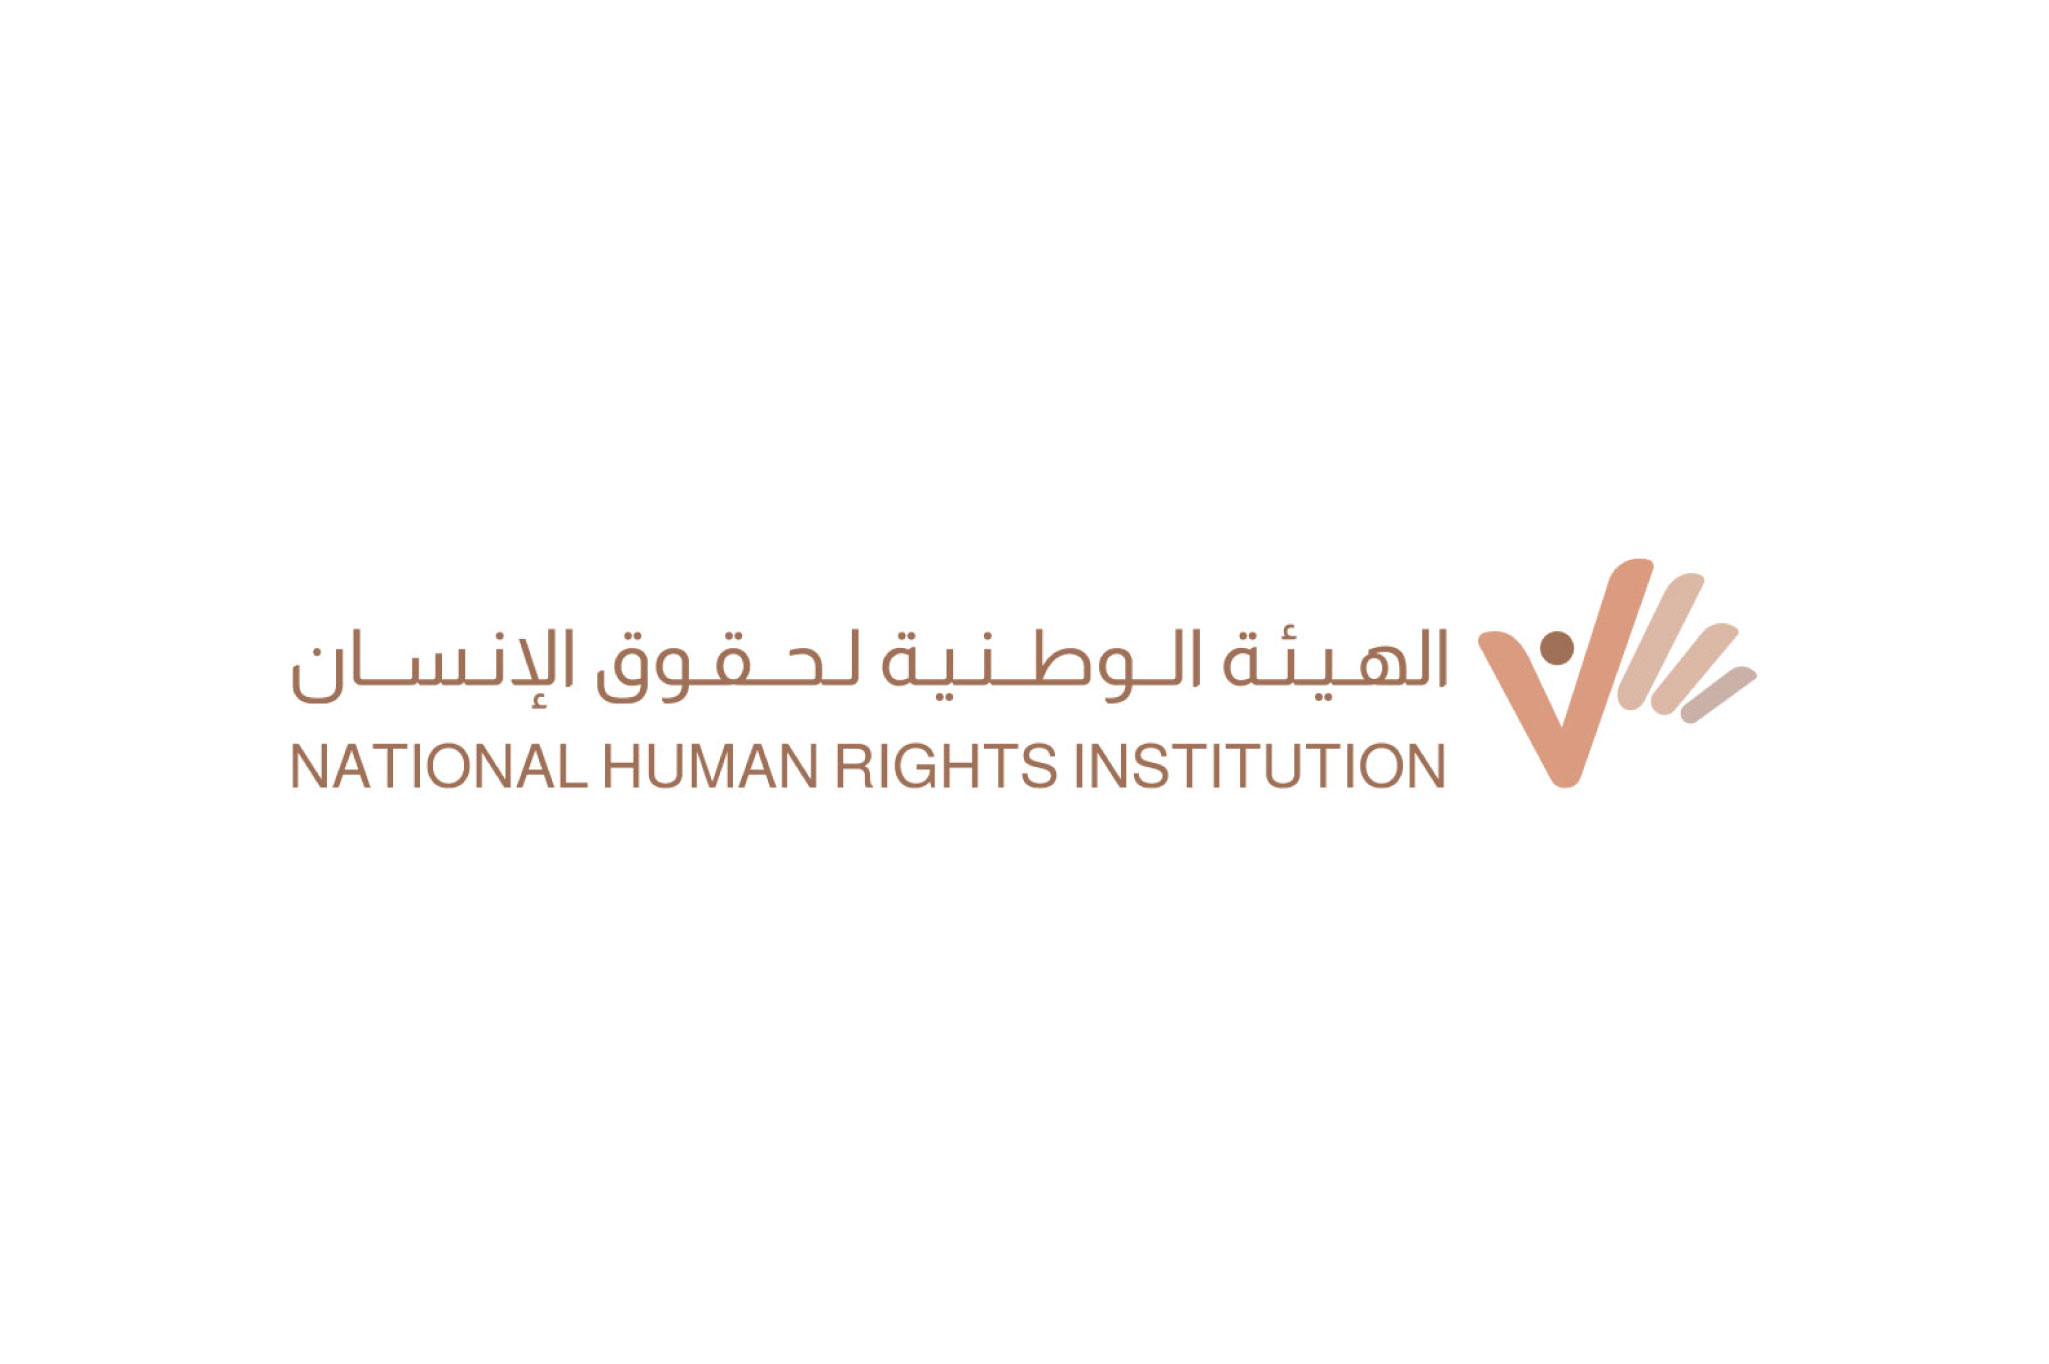 The Board of Trustees of the National Human Rights Institution holds its Fifth Meeting with the Participation Government Representatives